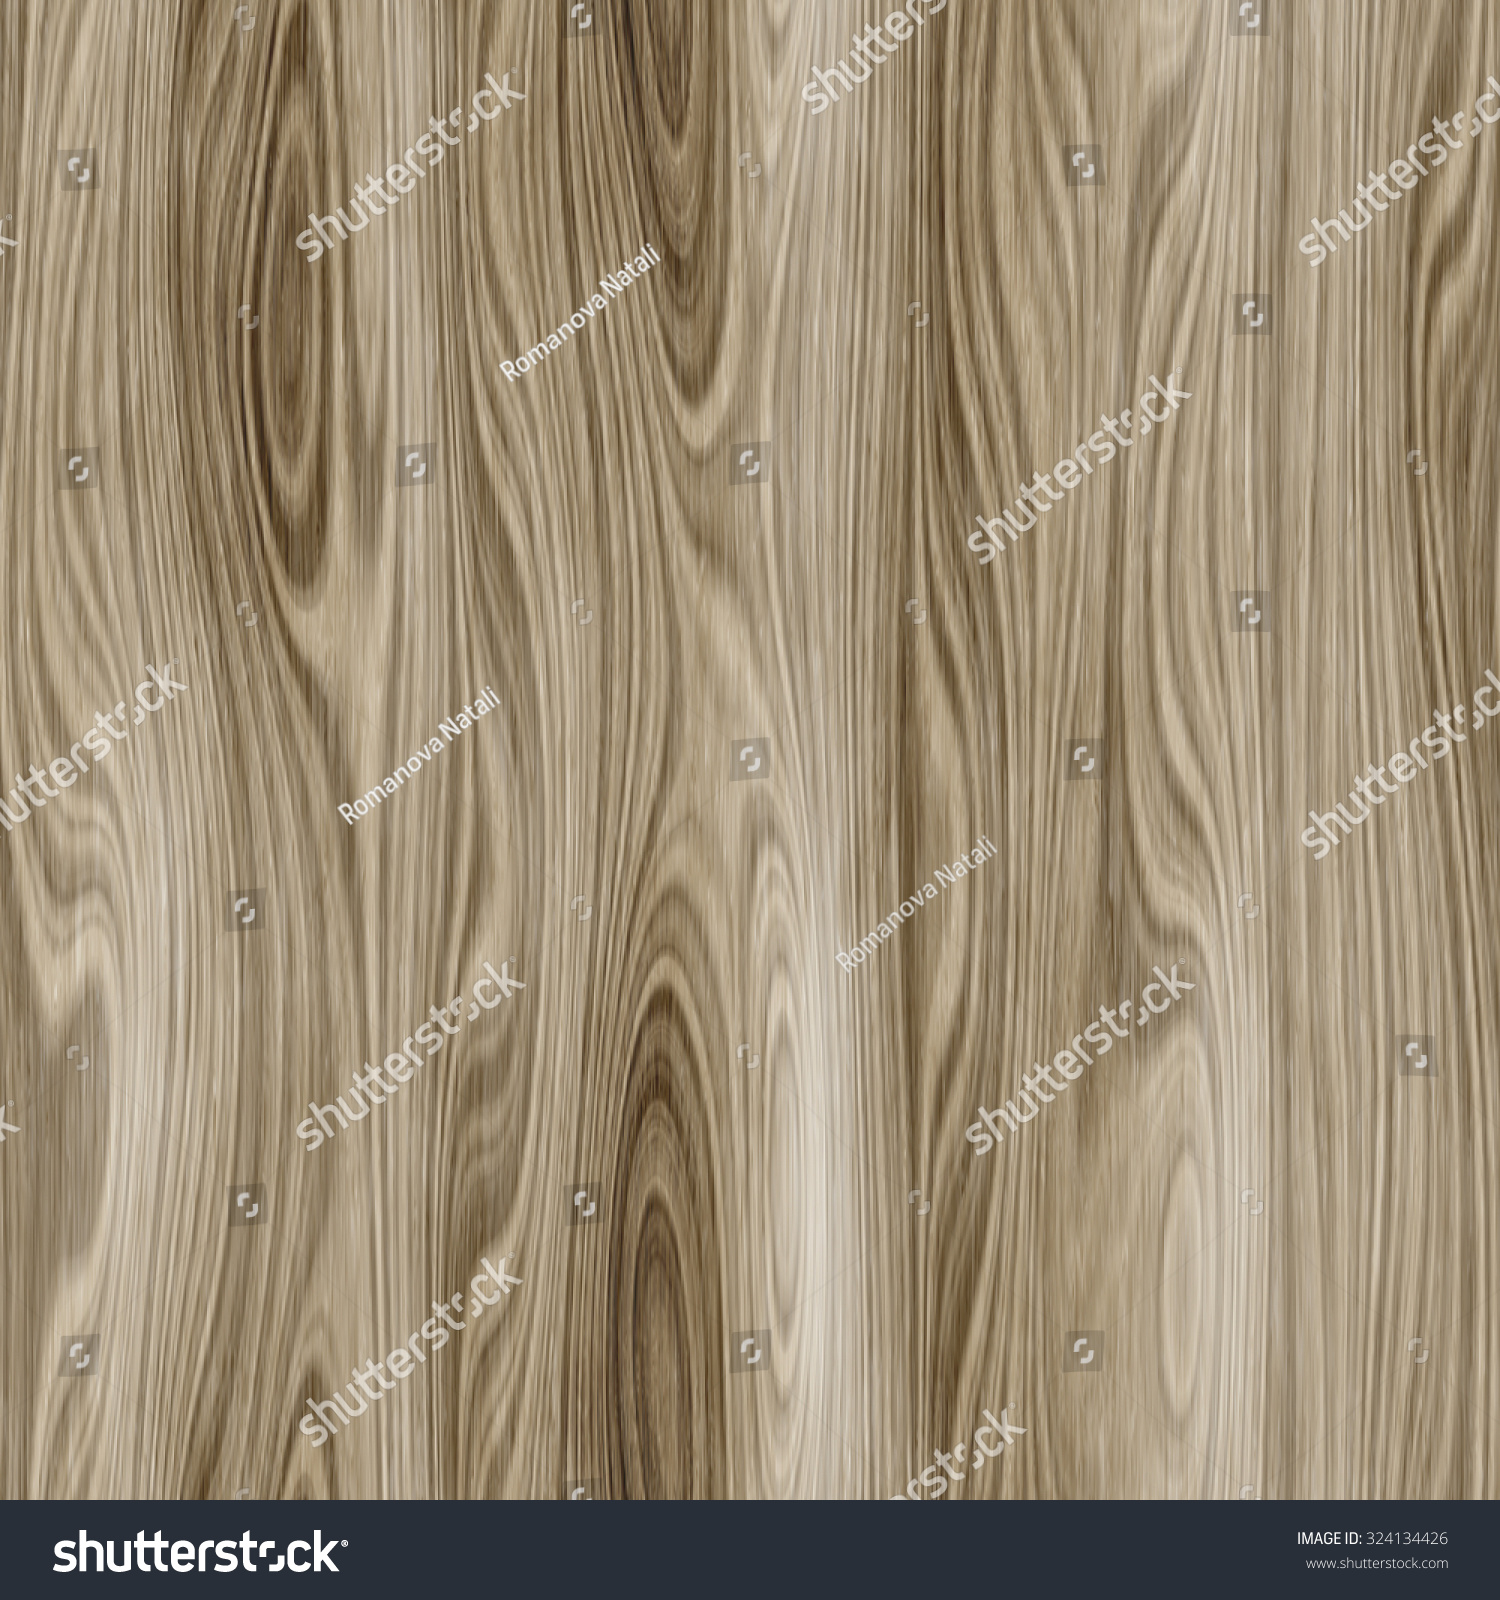 Seamless Light Brown Wood Surface Background Stock Illustration ...